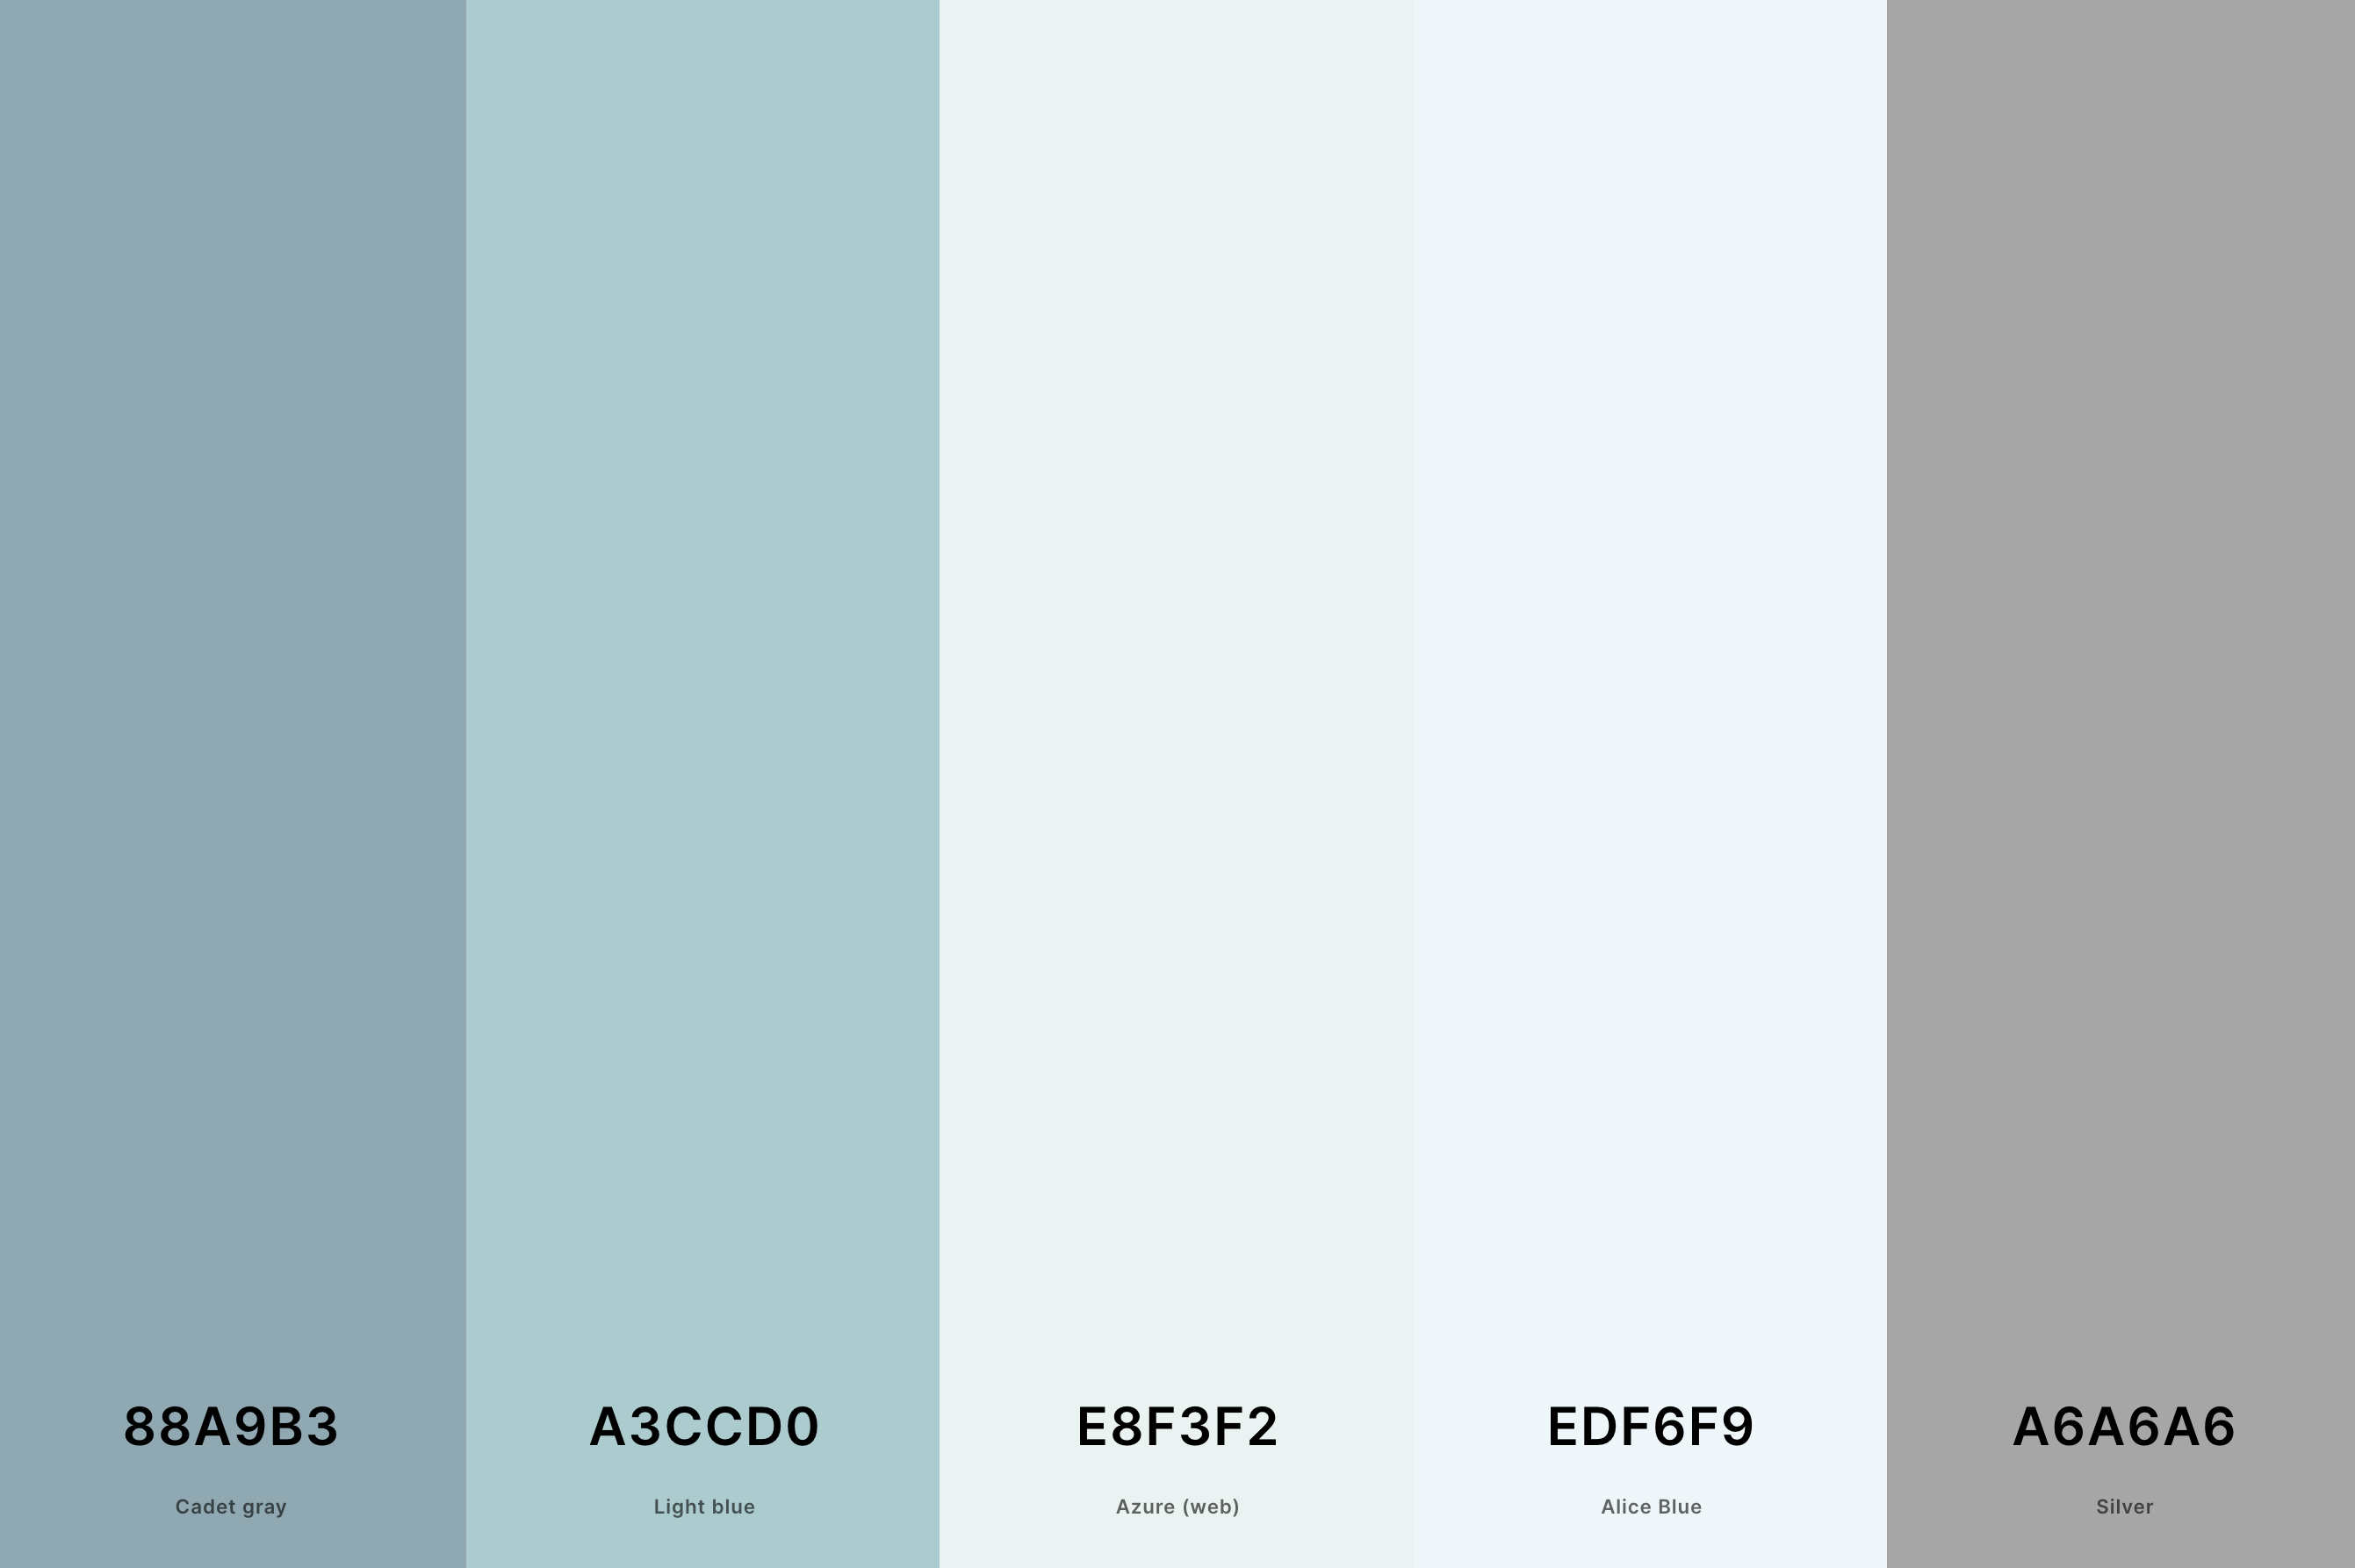 20. Aesthetic White Color Palette Color Palette with Cadet Gray (Hex #88A9B3) + Light Blue (Hex #A3CCD0) + Azure (Web) (Hex #E8F3F2) + Alice Blue (Hex #EDF6F9) + Silver (Hex #A6A6A6) Color Palette with Hex Codes